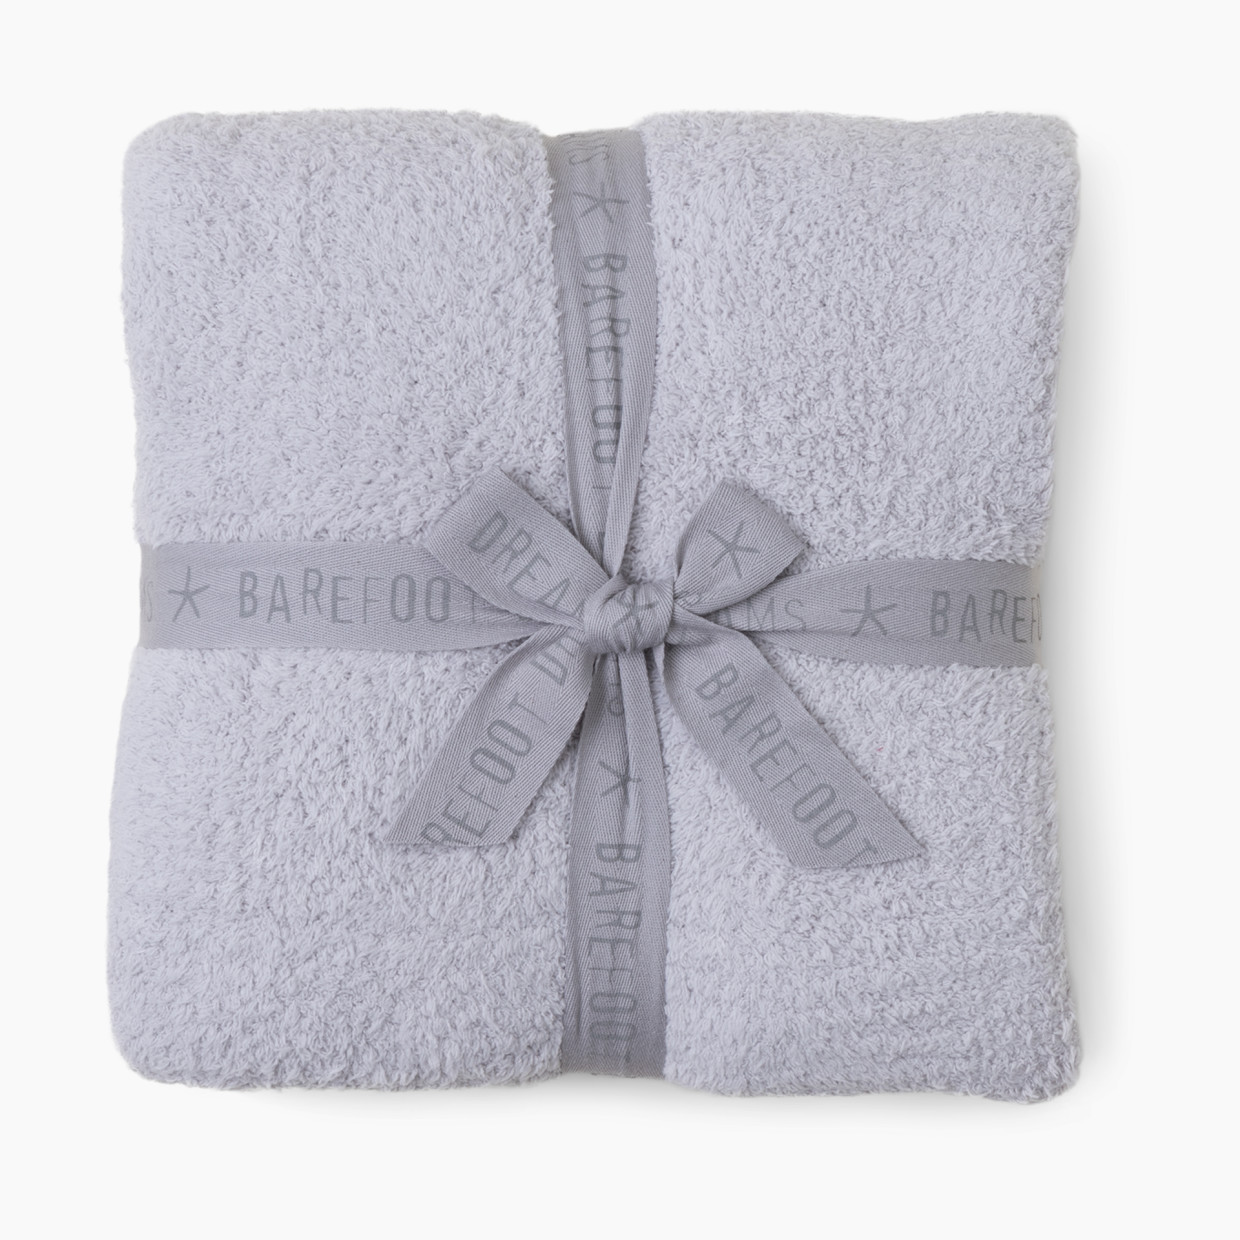 Barefoot Dreams CozyChic Throw - Oyster.